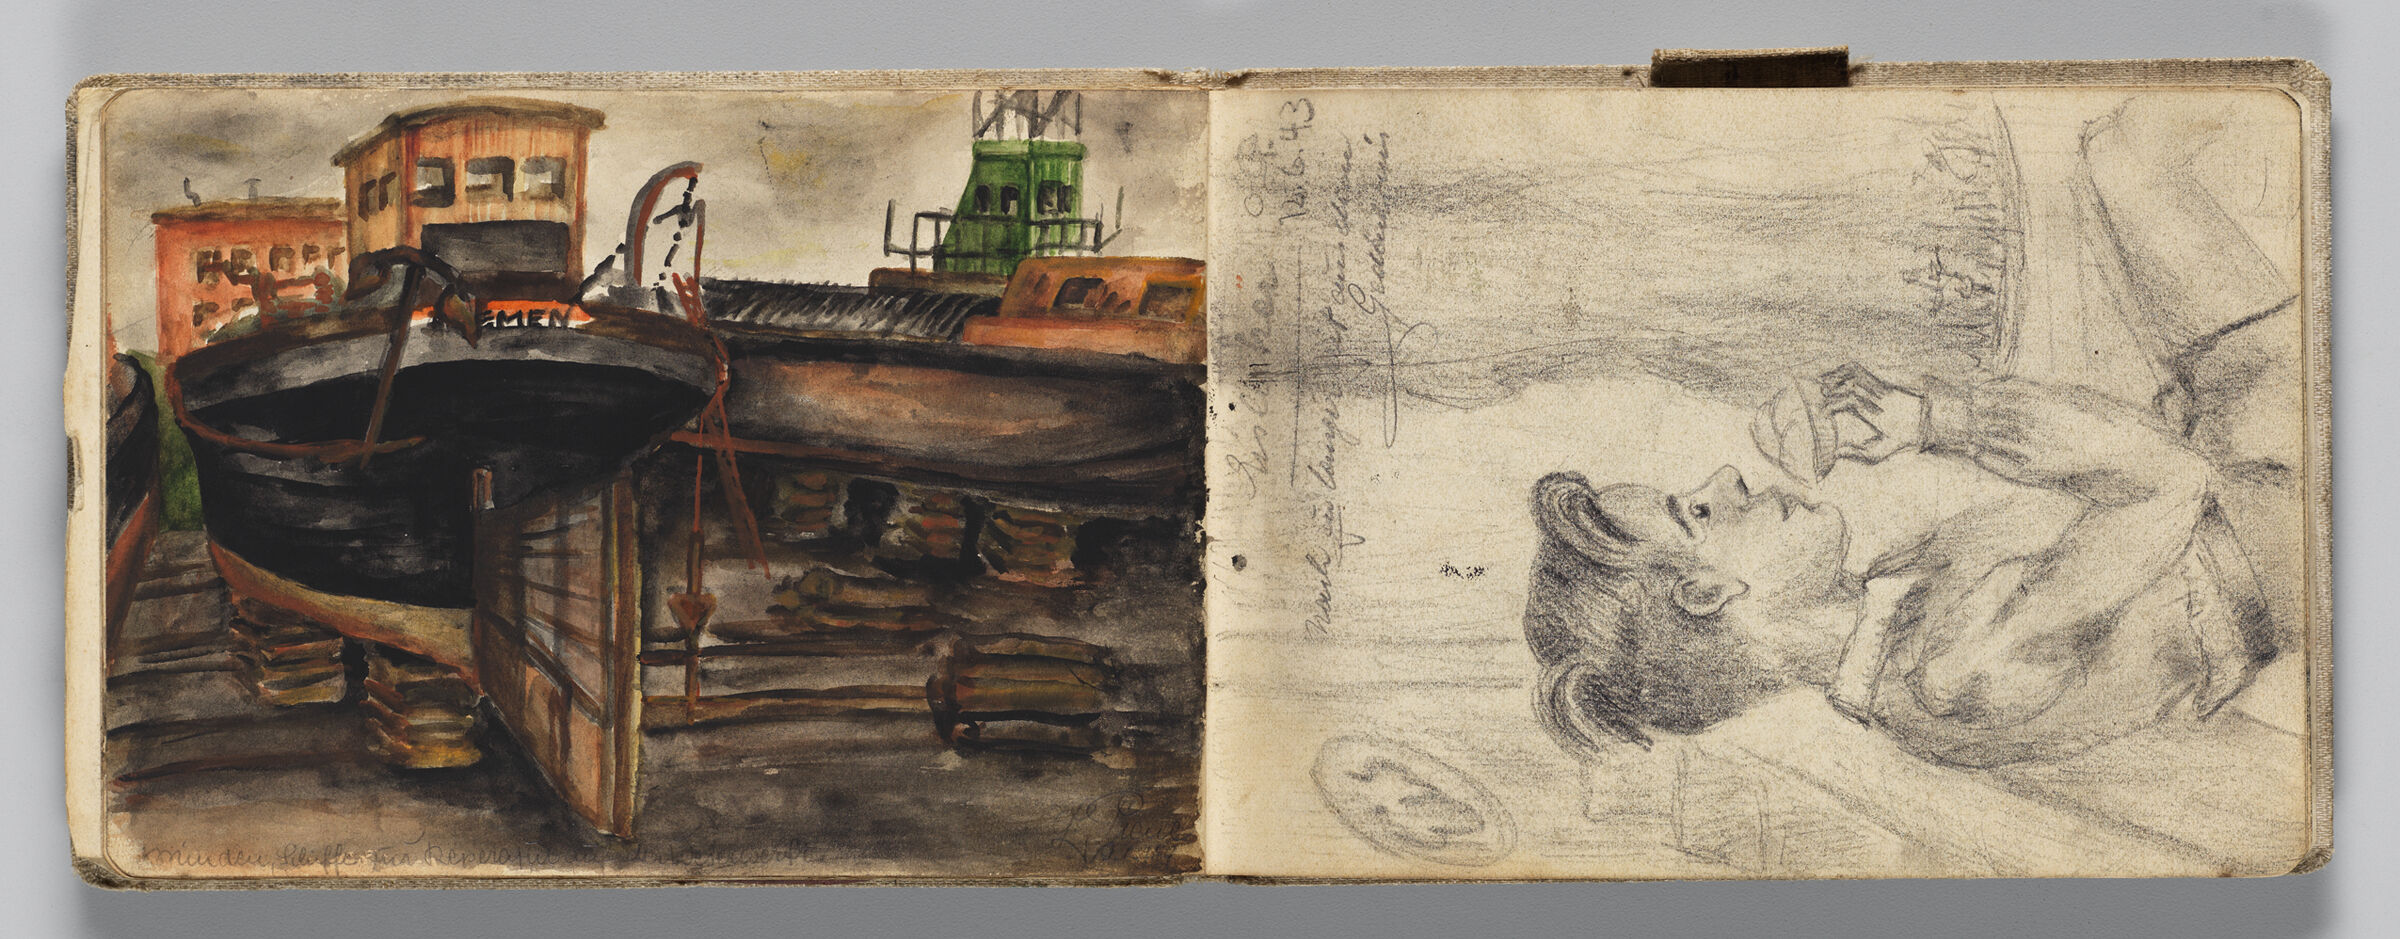 Untitled (Ships In Yard, Left Page); Untitled (Boy Eating A Treat, Right Page)